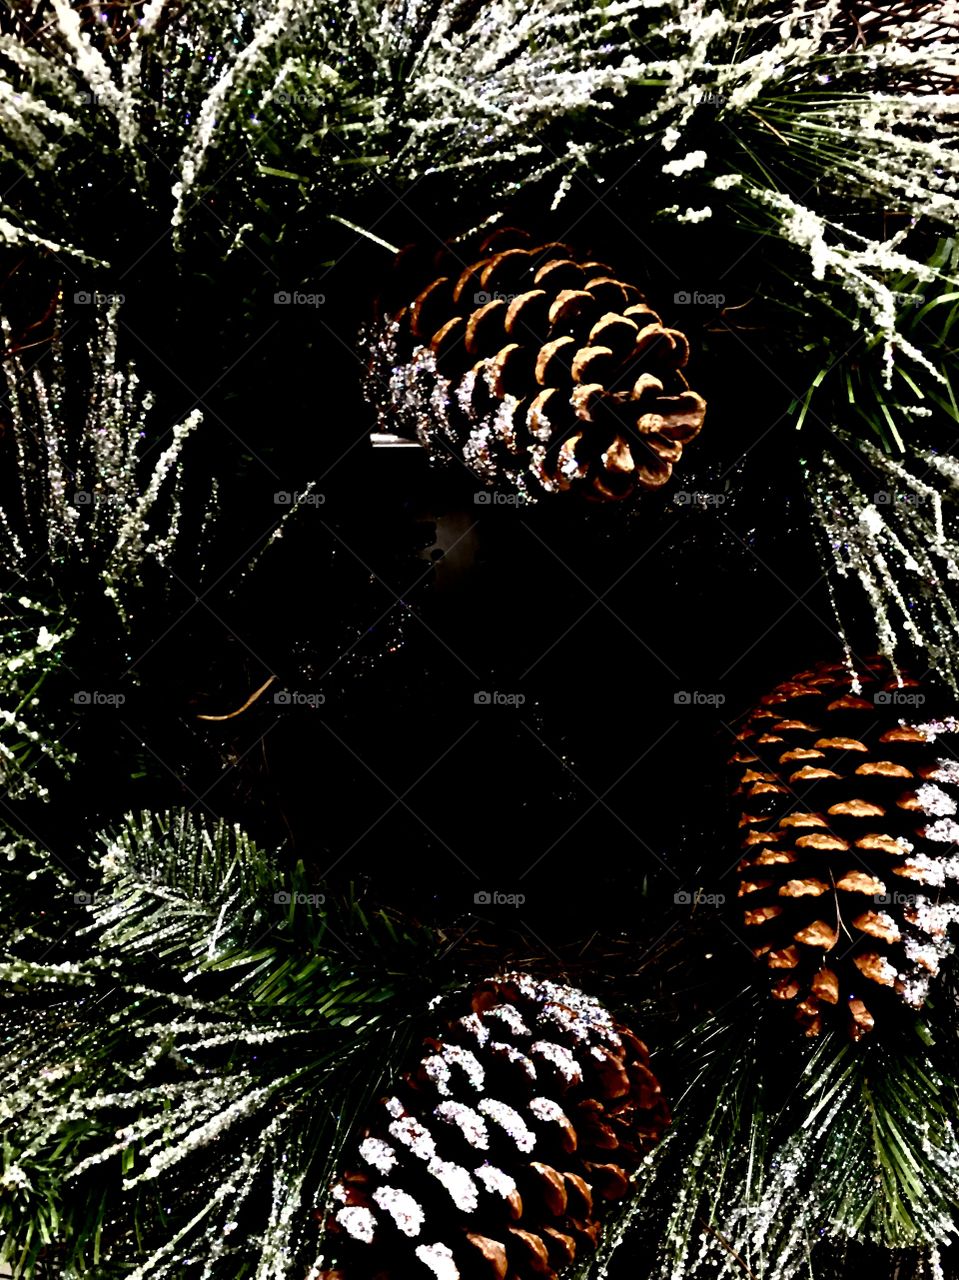 Snow, dusting, pine cones, pine tree, pine cone, evergreen, snow covered, decoration, wreath, lightly covered, winter, season, seasons, seasonal, no person, evergreen, needle, signs of winter